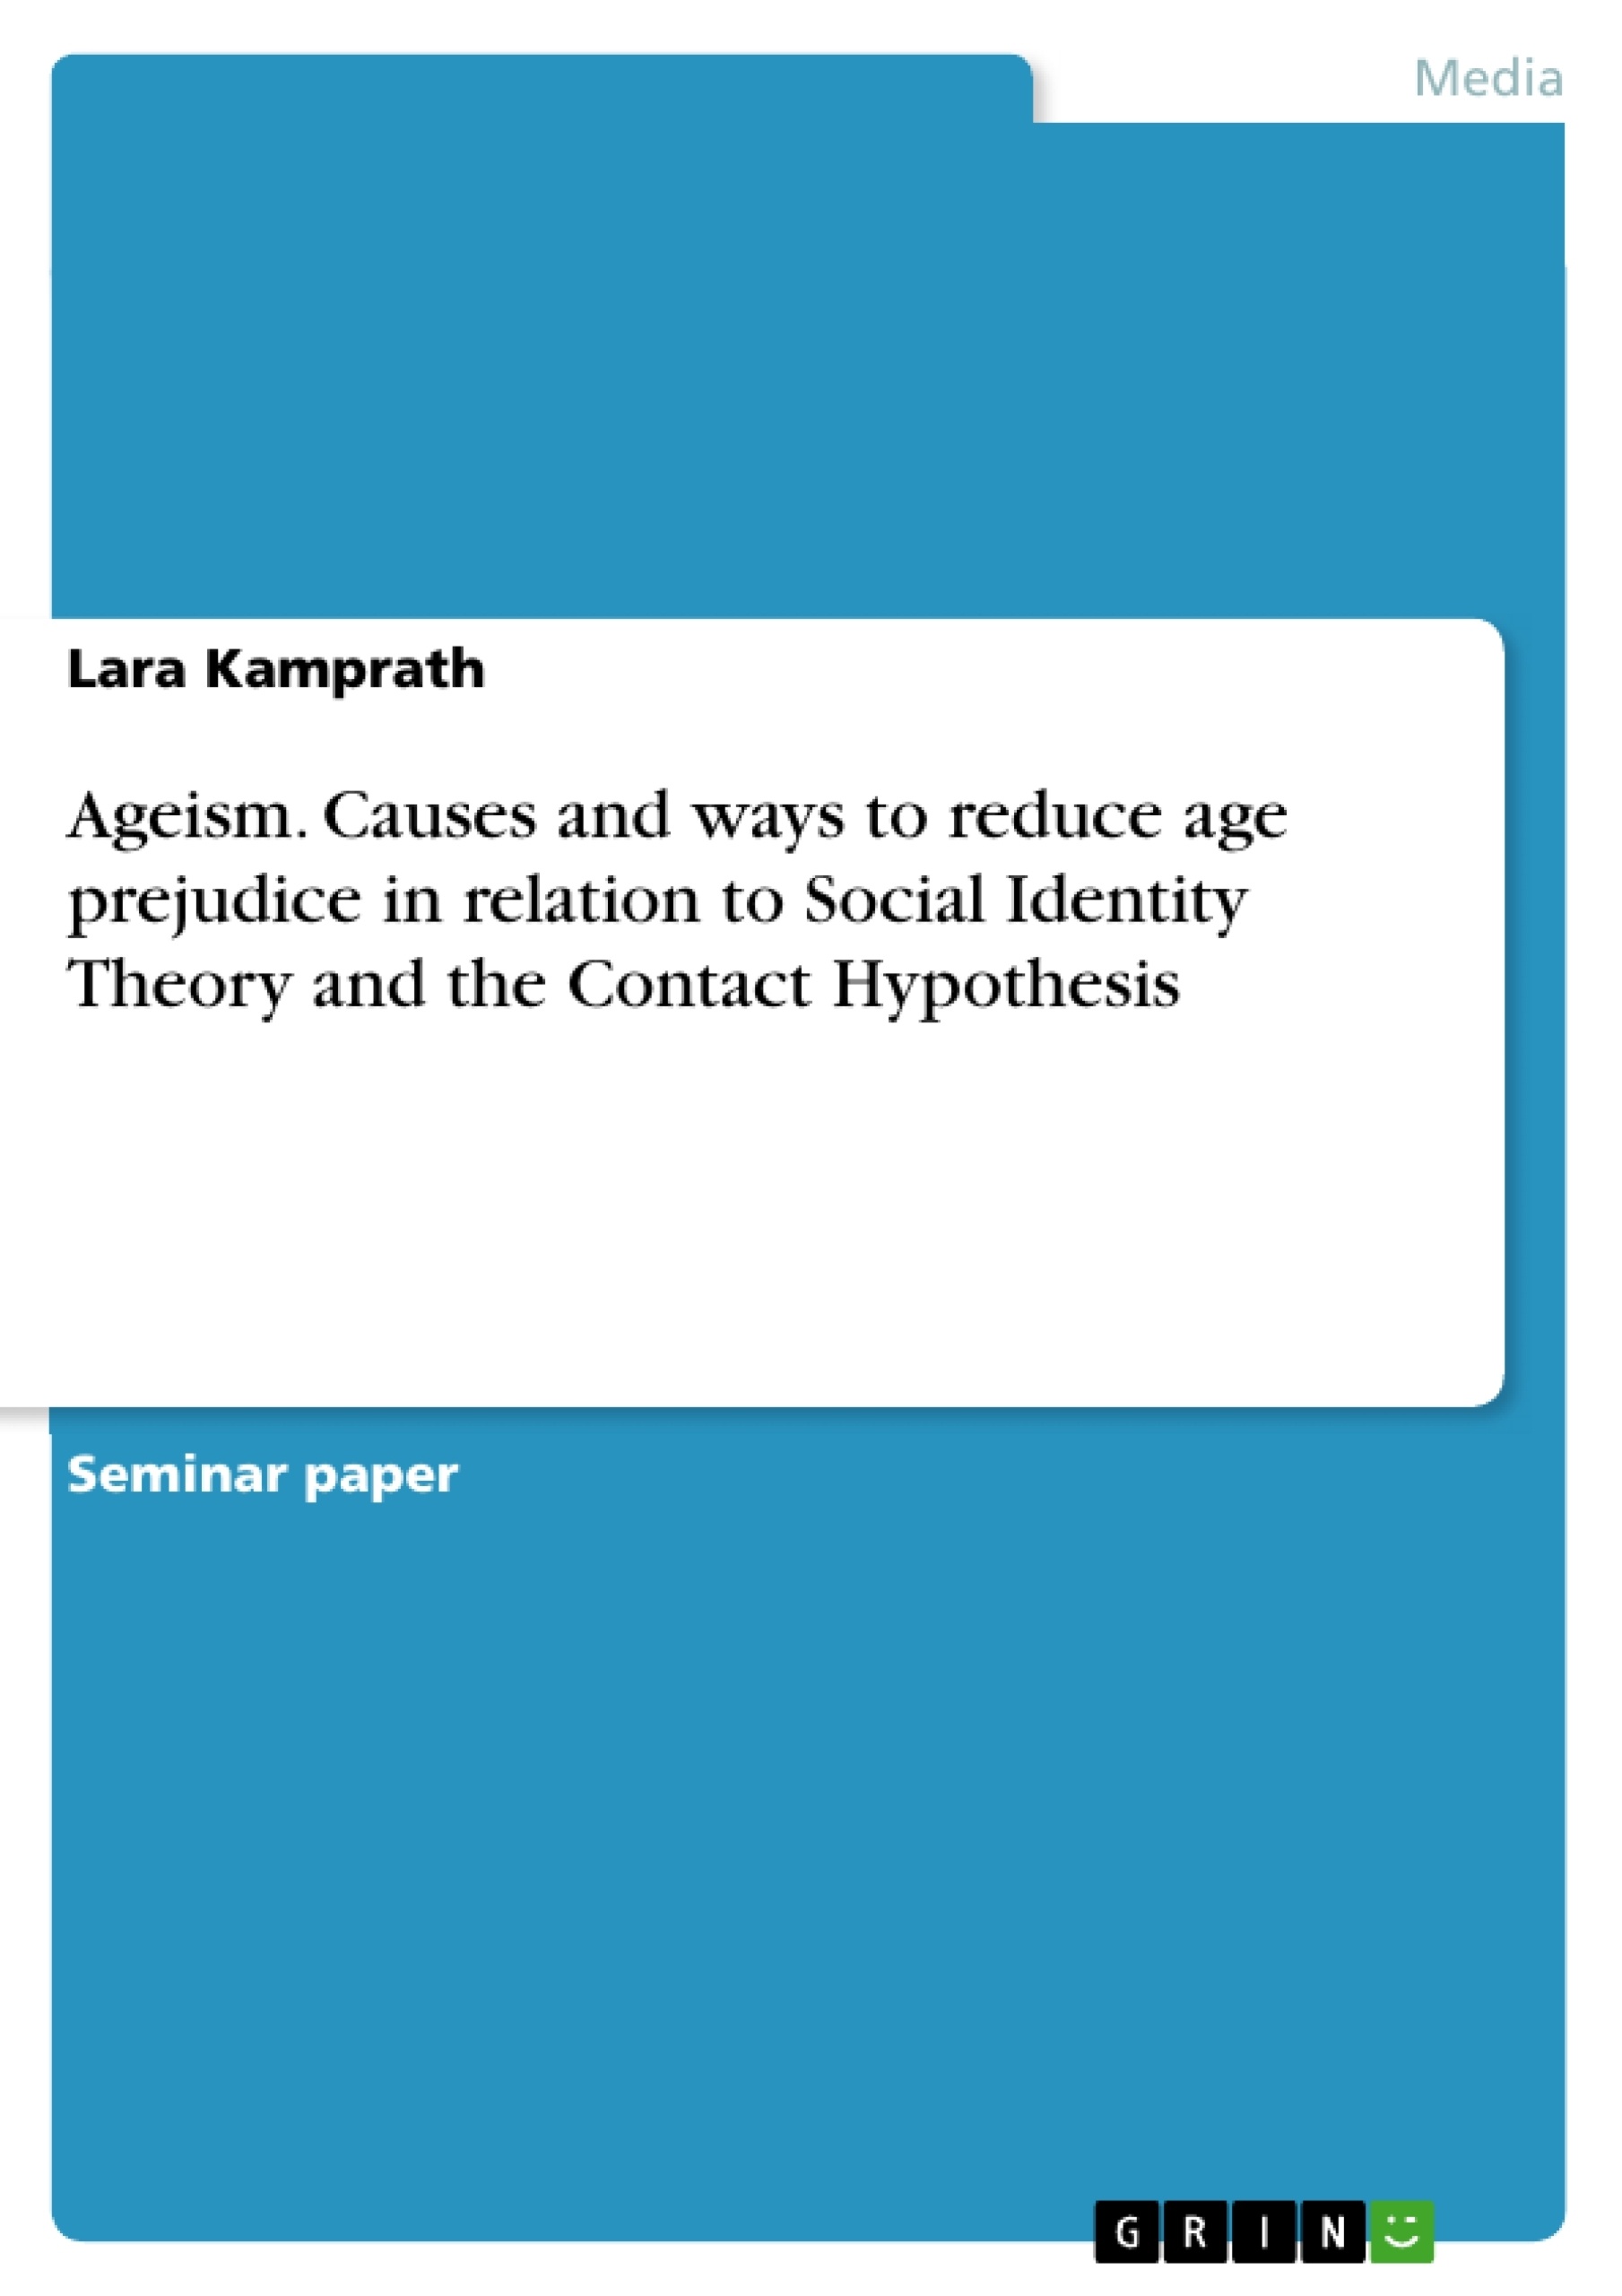 Titre: Ageism. Causes and ways to reduce age prejudice in relation to Social Identity Theory and the Contact Hypothesis